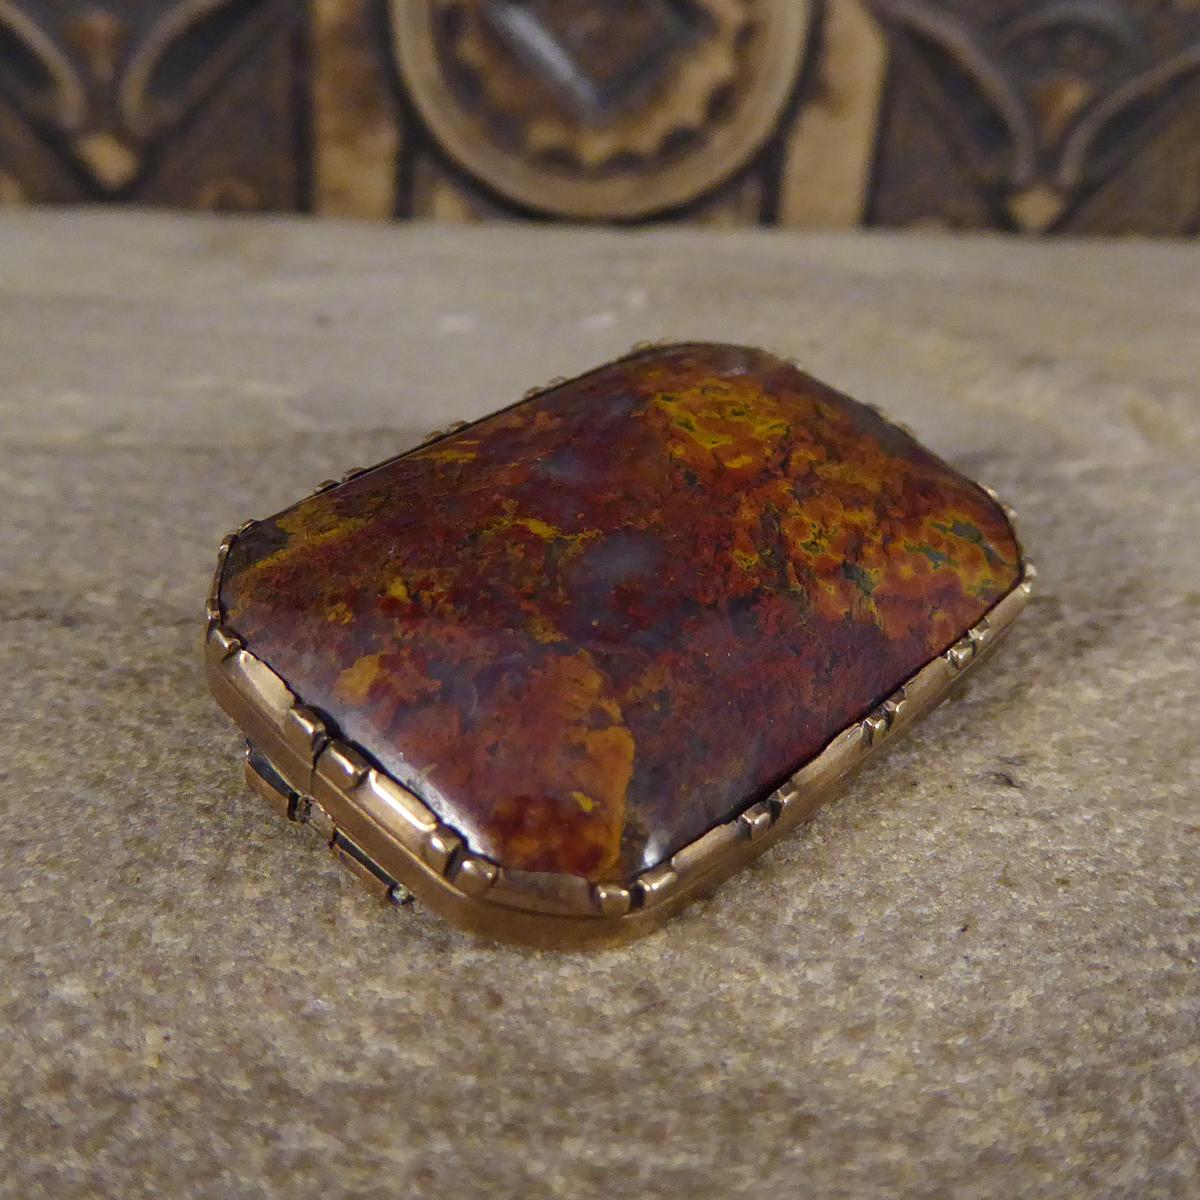 Showing that quality jewellery really does stand the test of time, this gorgeous antique Brooch was hand crafted in the Early Victorian era. This antique brooch is set in Yellow Gold and features a beautiful Agate stone that is known for its